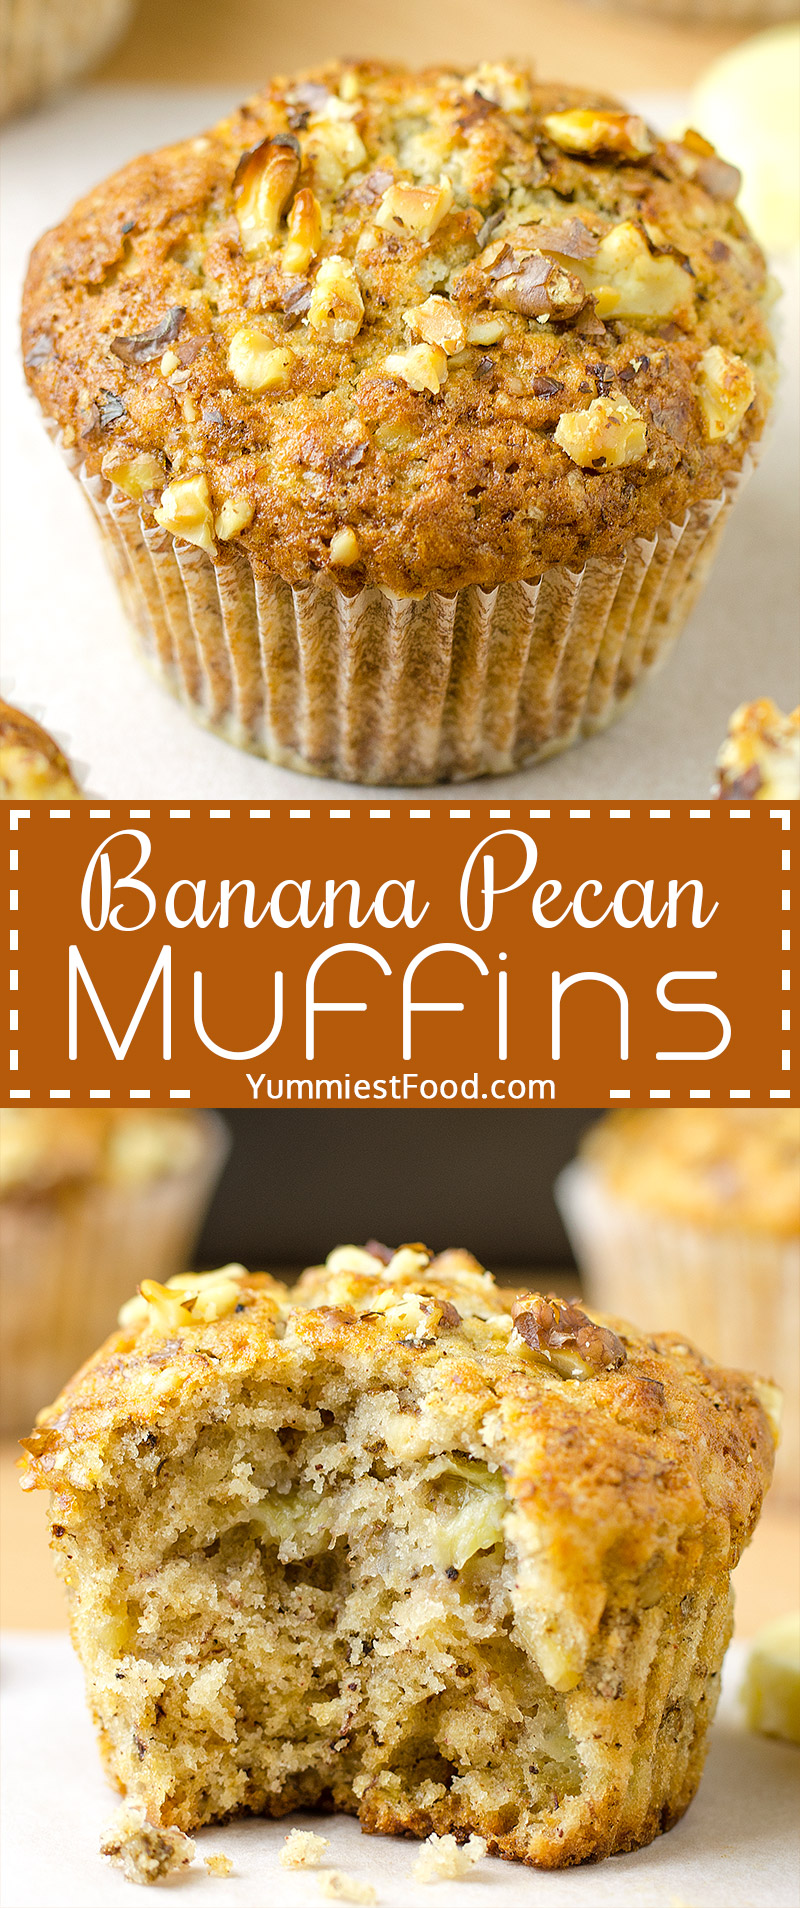 BANANA PECAN MUFFINS - Great for breakfast, snack or a dessert